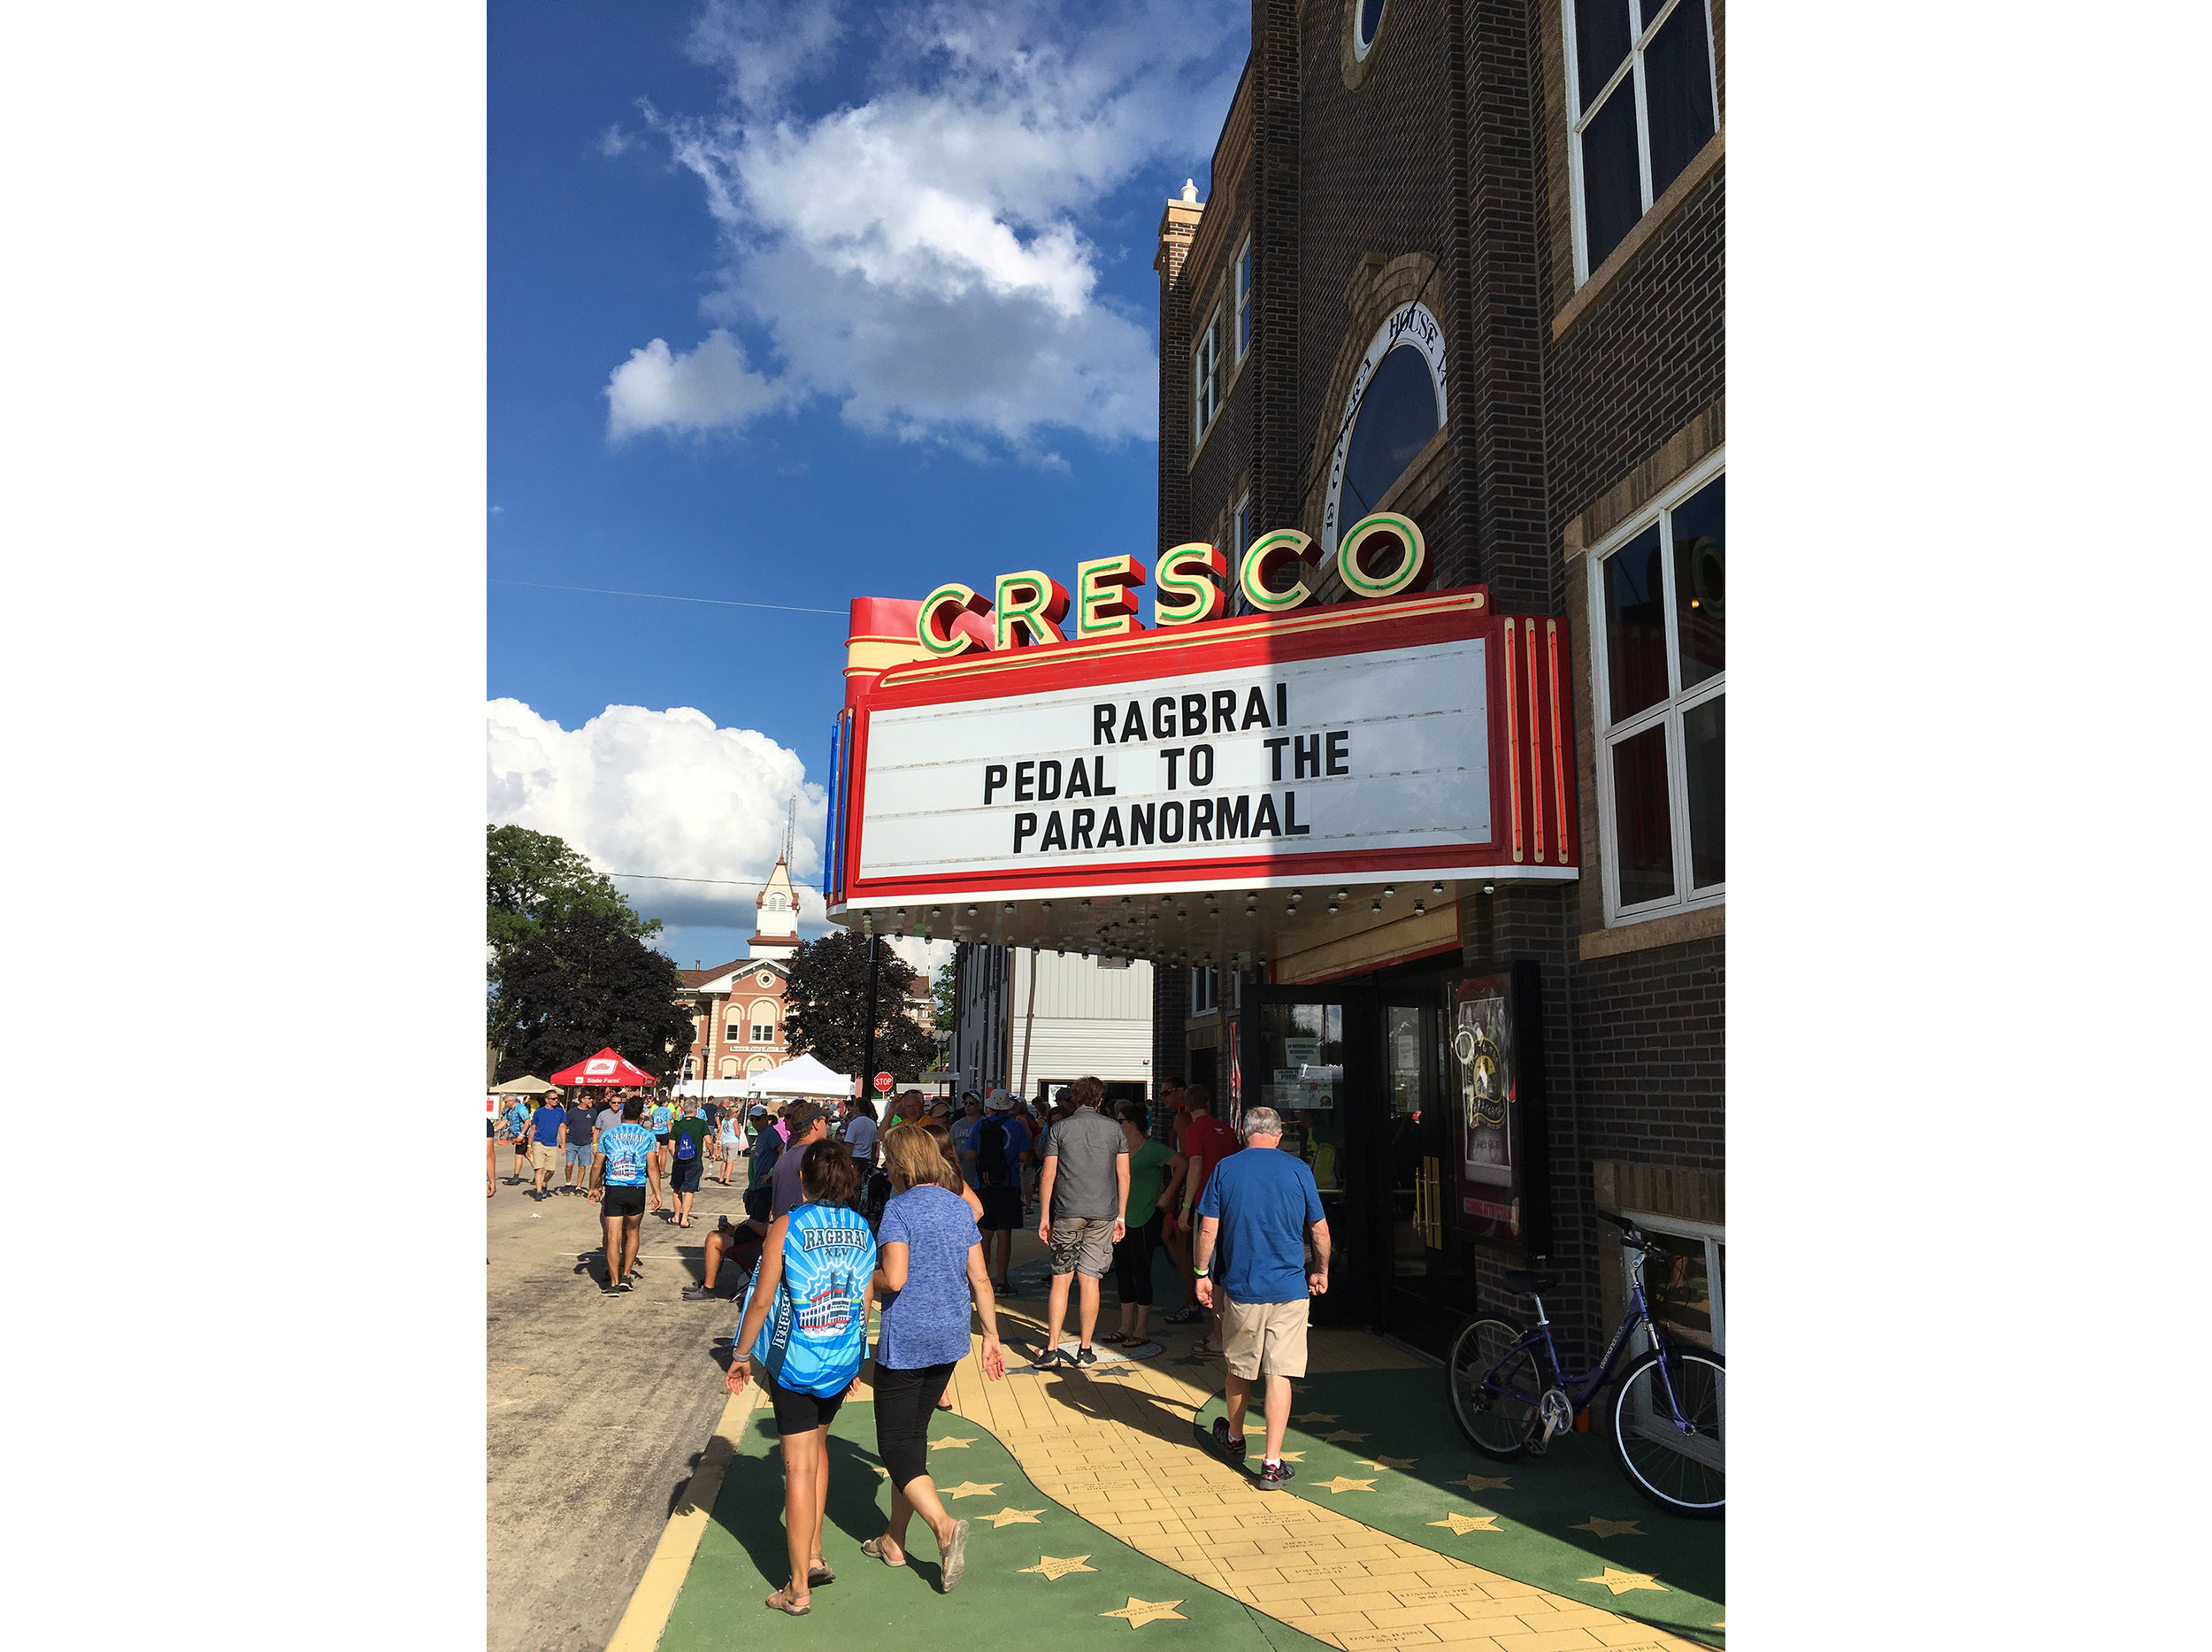  The theme in Cresco was of the paranormal variety. There were spooky characters all over town, and the riders enjoyed the festivities. 